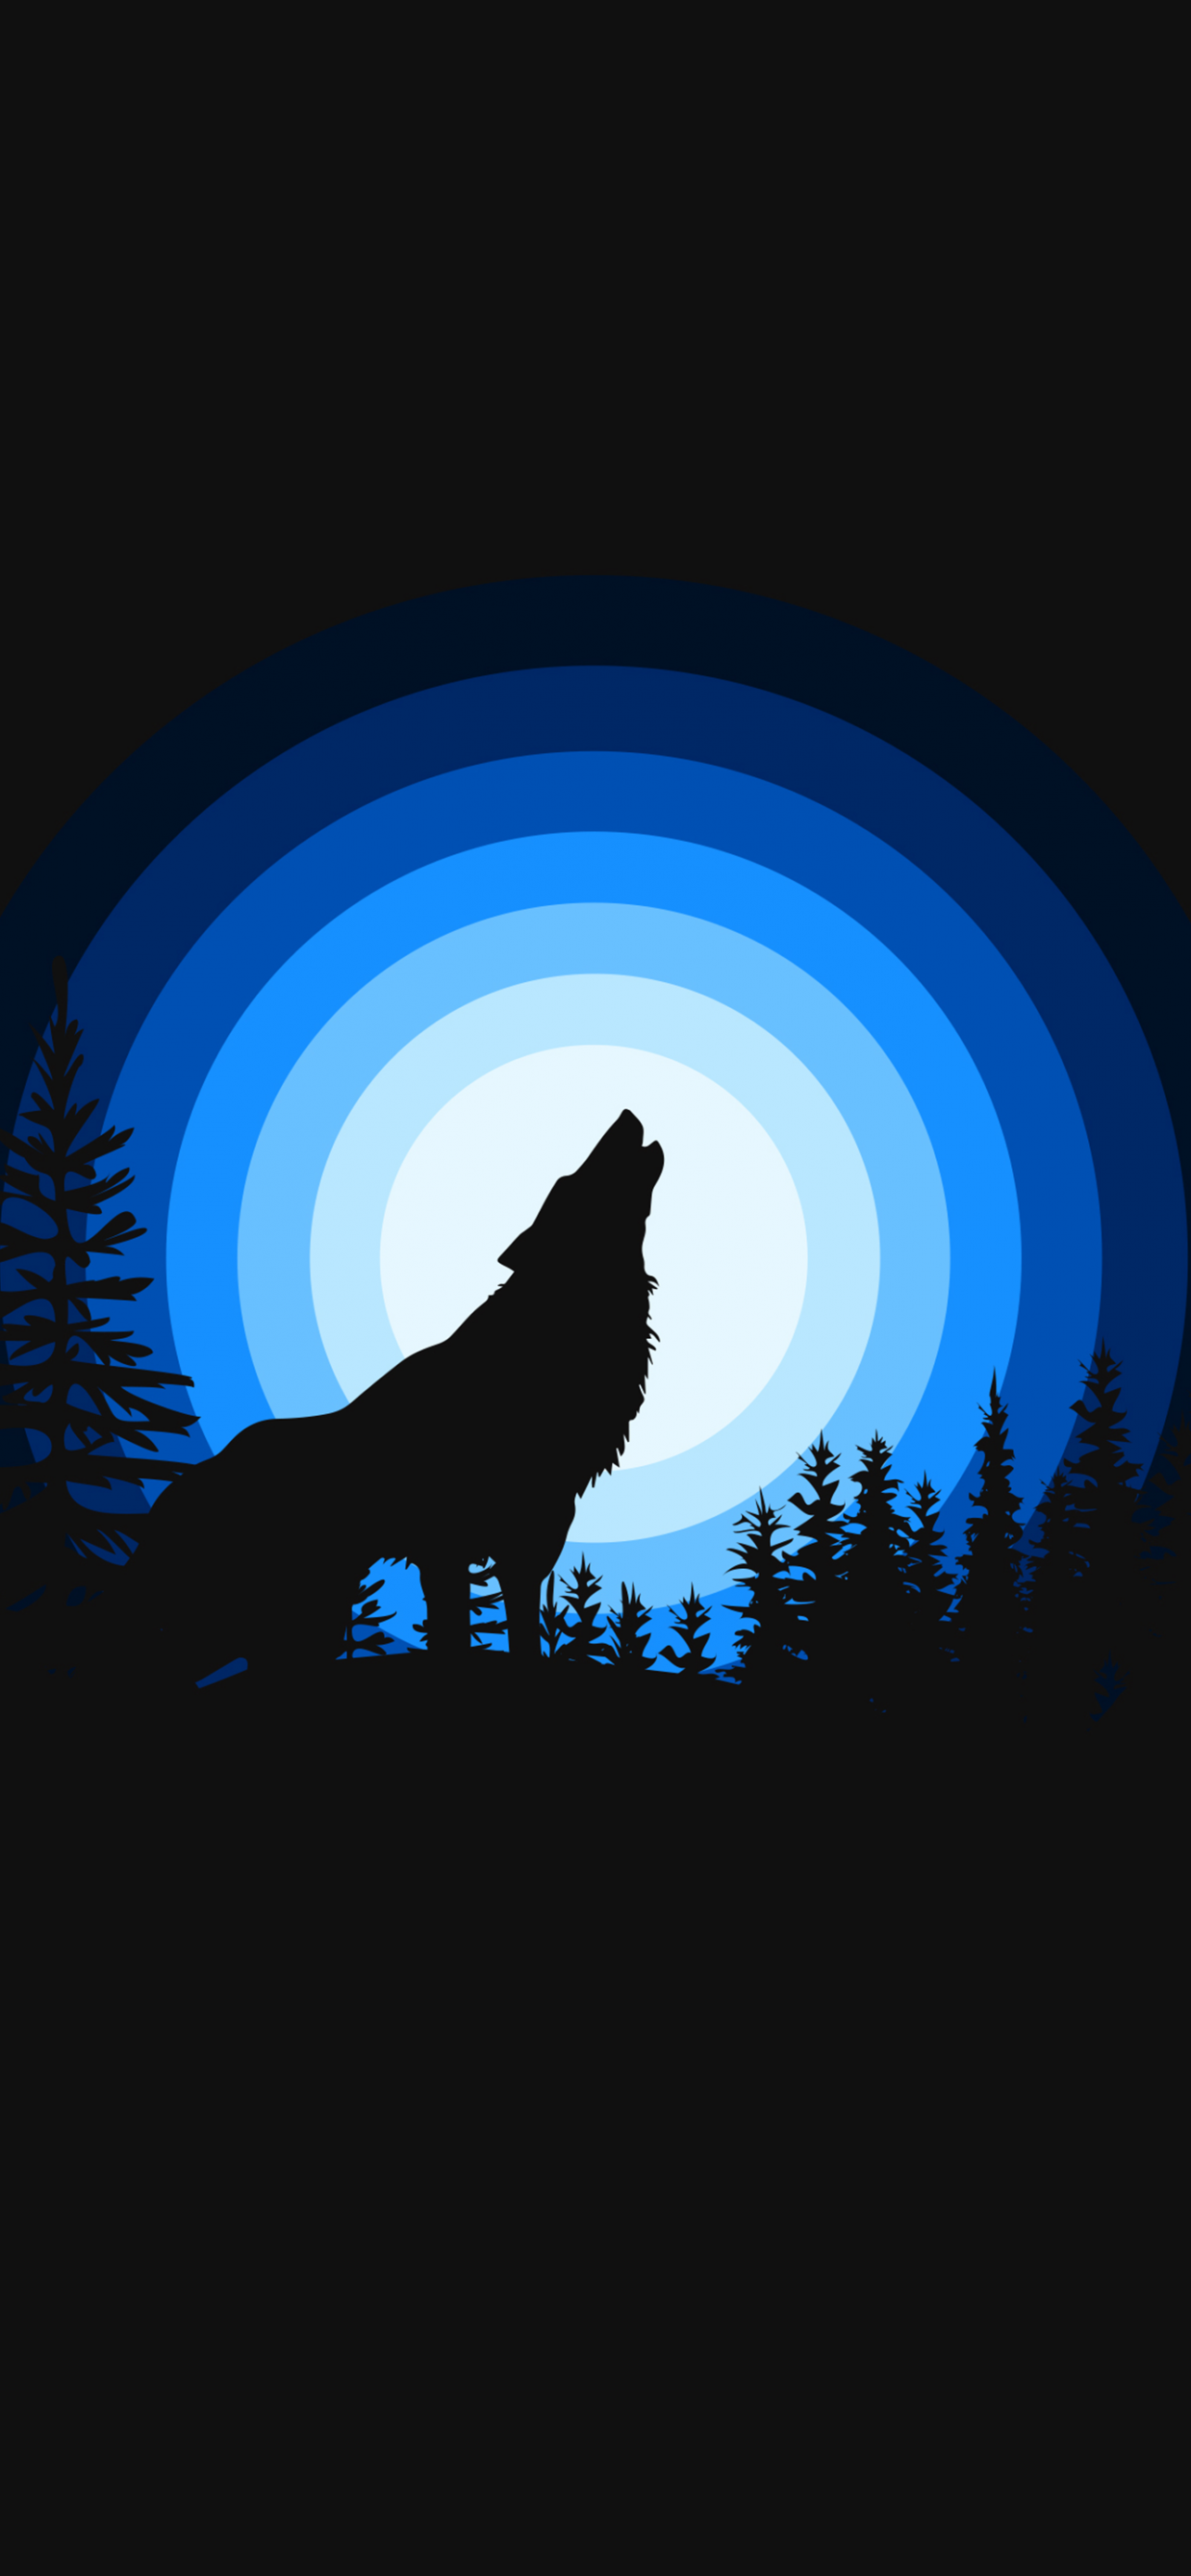 Awesome Cool Wolf Wallpaper Free Download Wallpapers Download Free Cool  Wallpapers For Pc Download Free Wallpapers For Mobile Cell Phone Free Wallpapers  Backgrounds Modular Fabric Sofa Pc Wallpapers  फट शयर